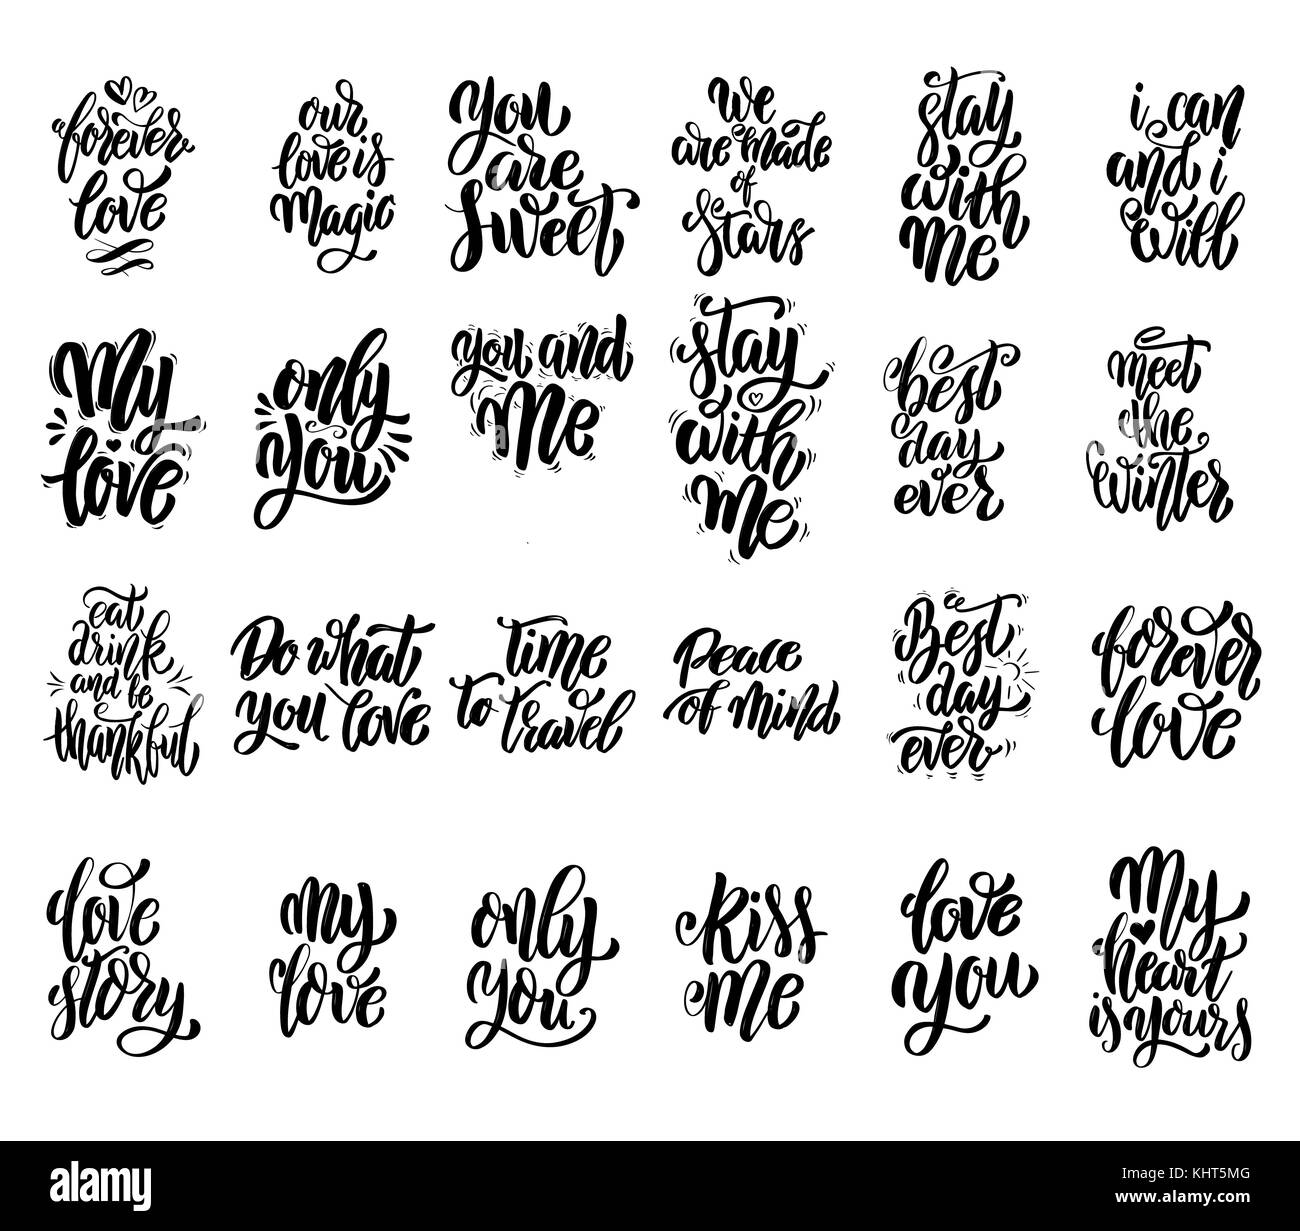 Set of hand written lettering motivational quotes, inspirational typography slogans. Design elements for poster, card, banner. Vector elements Stock Photo